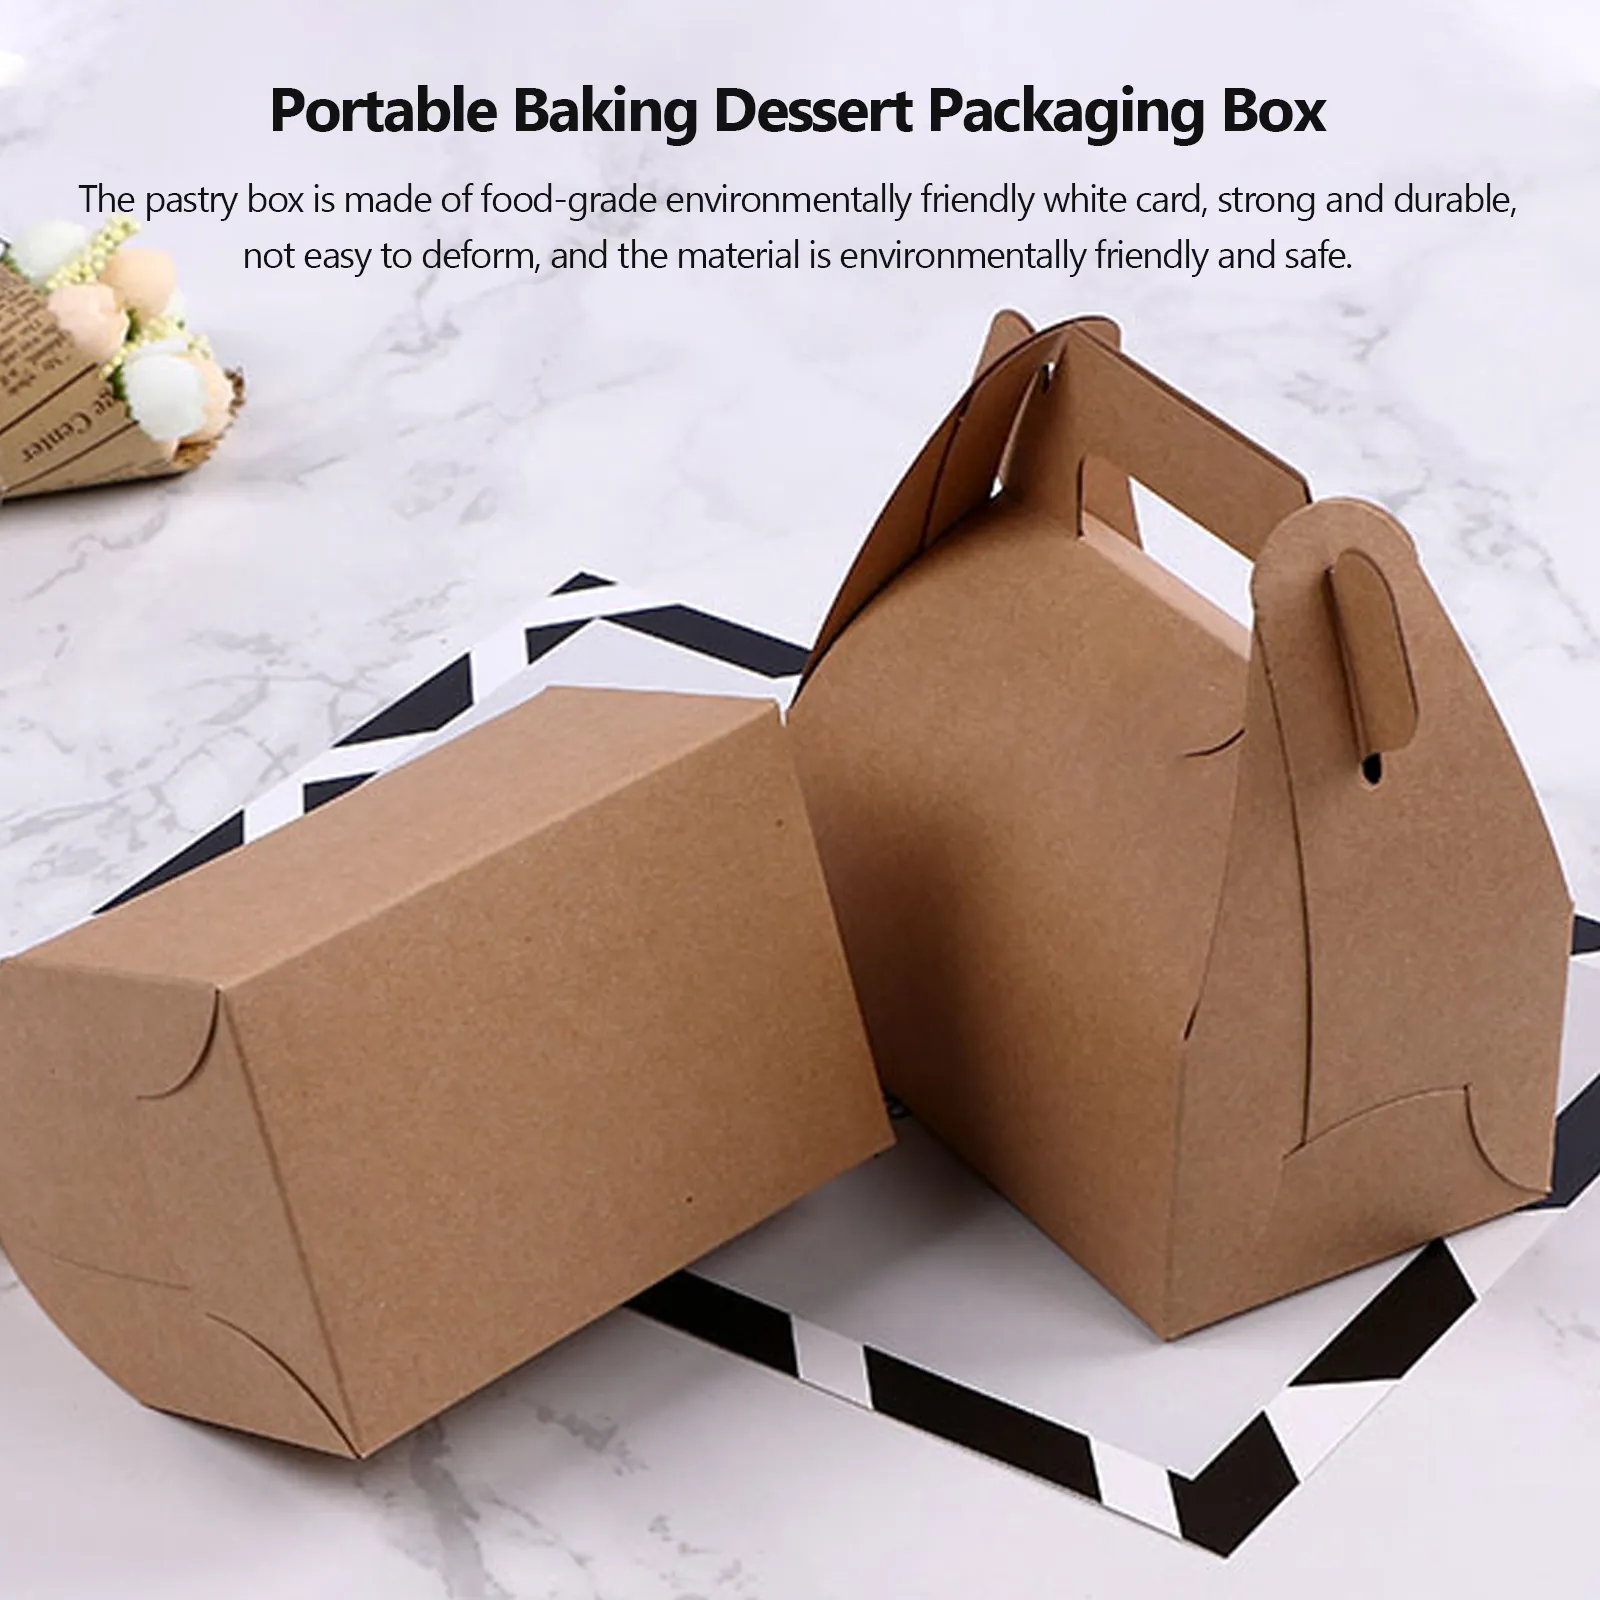 10pcs Cake Packaging Boxes Food Packing Boxes Portable Packing Boxes |  10pcs Cake Packaging Boxes Food Packing Boxes Portable Packing Boxes |  